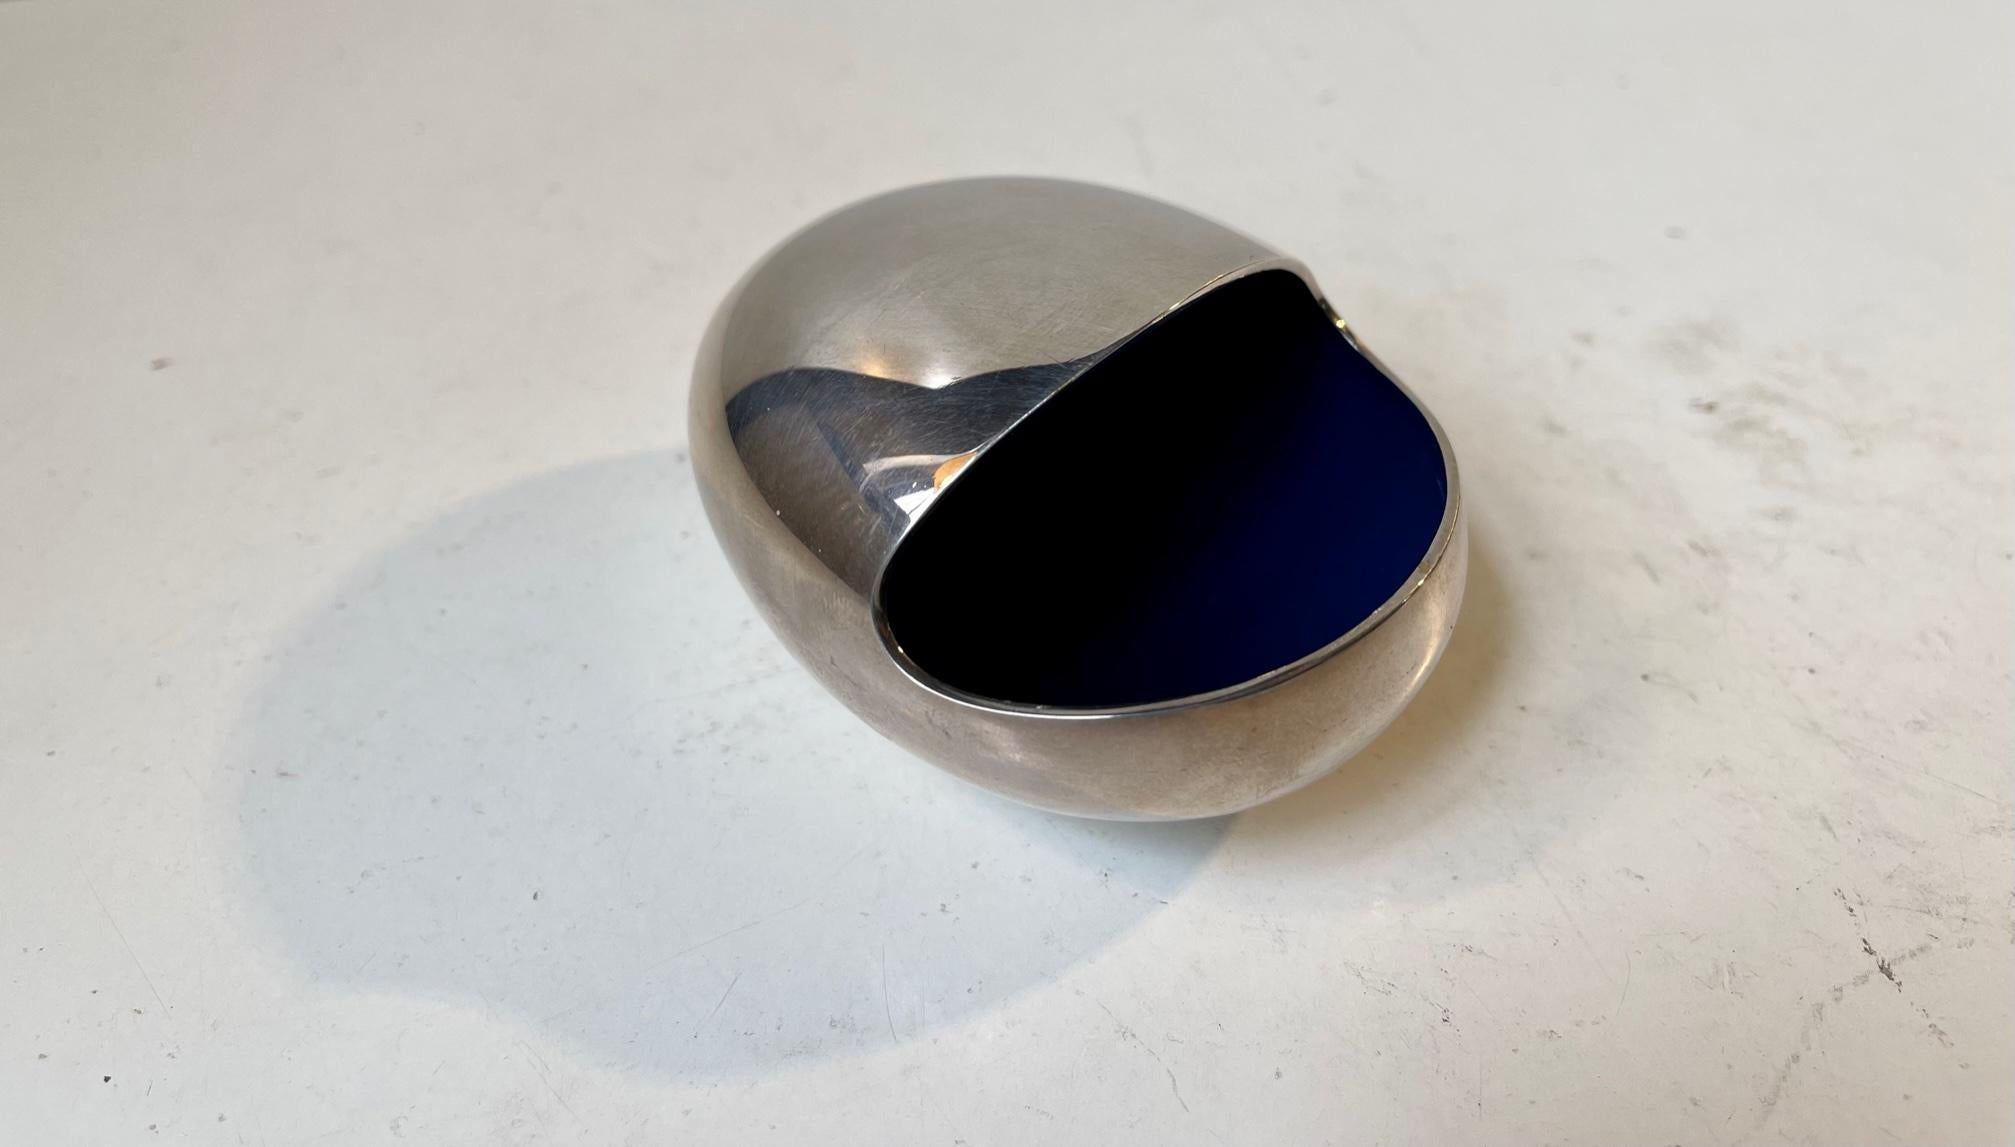 Mid-Century Modern Smiling Egg in Silverplate and Blue Enamel from Carl Cohr, 1950s